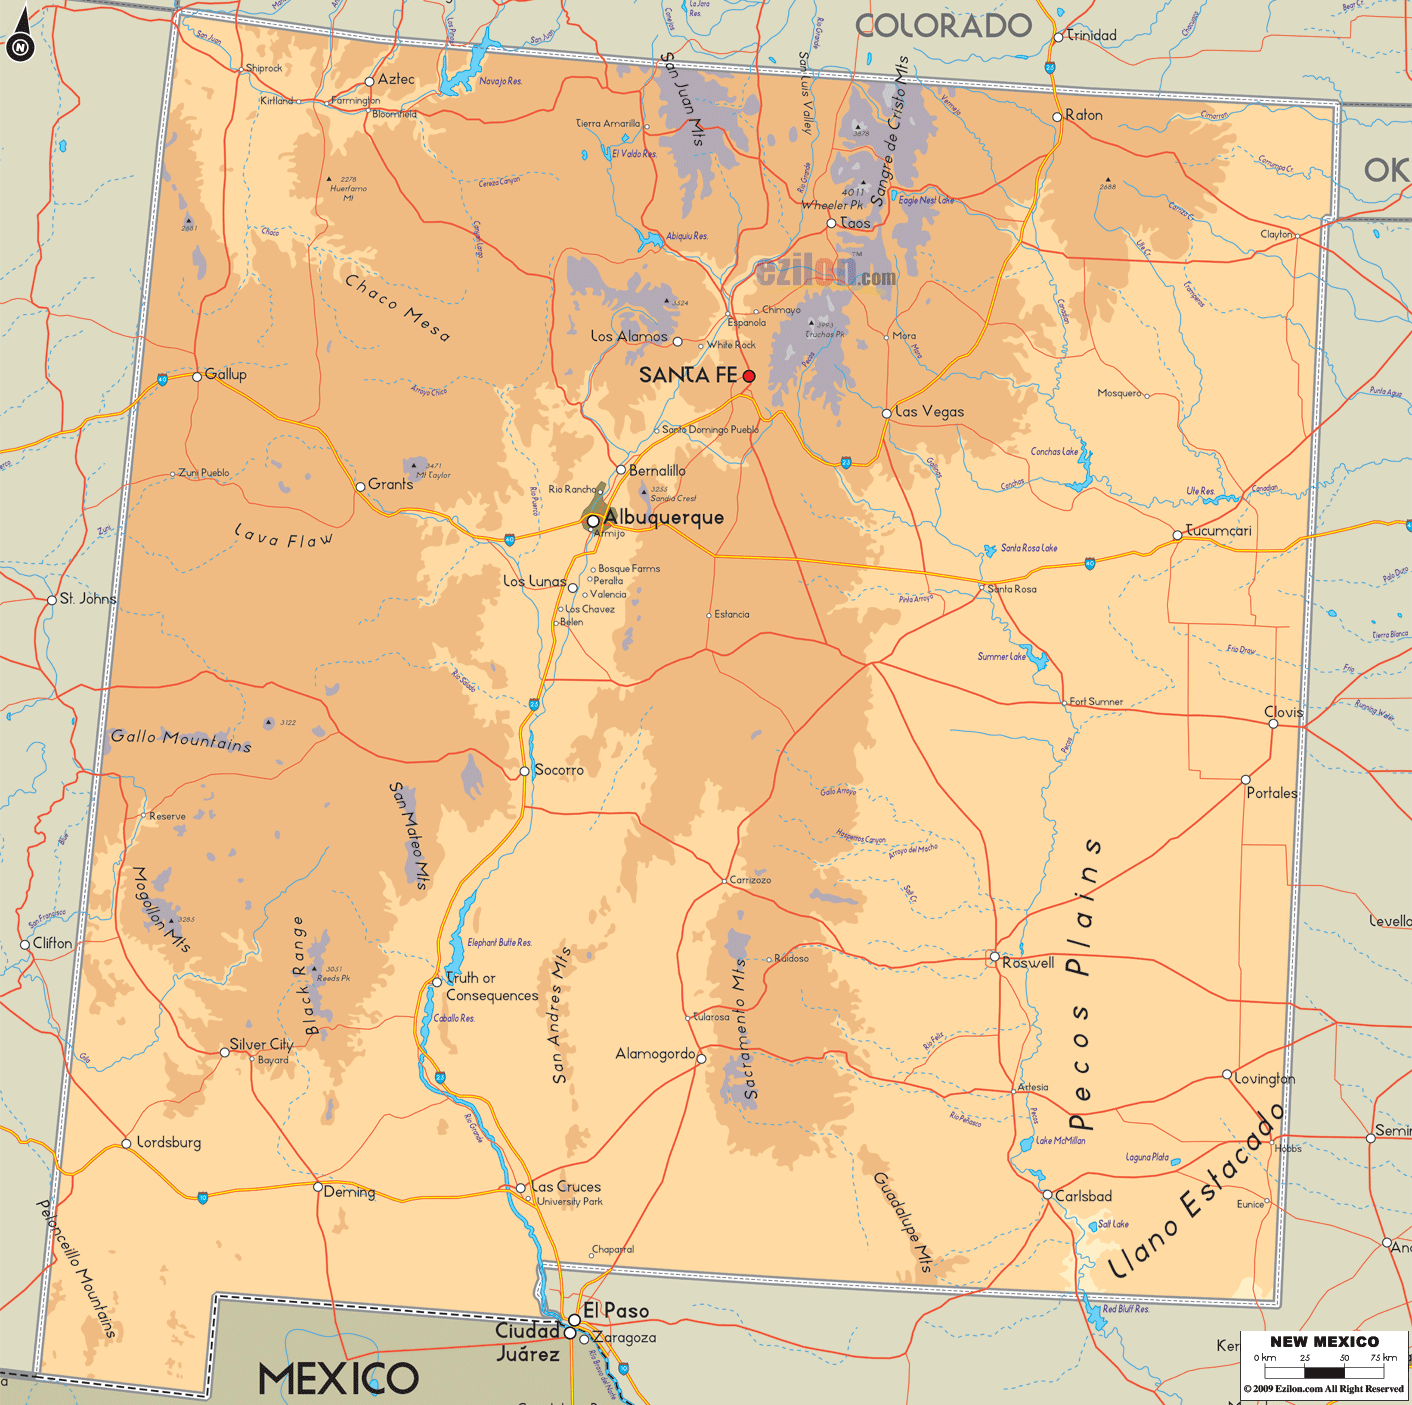 Physical map of New Mexico State, USA showing major geographical features such as rivers, lakes, topography and land formations.